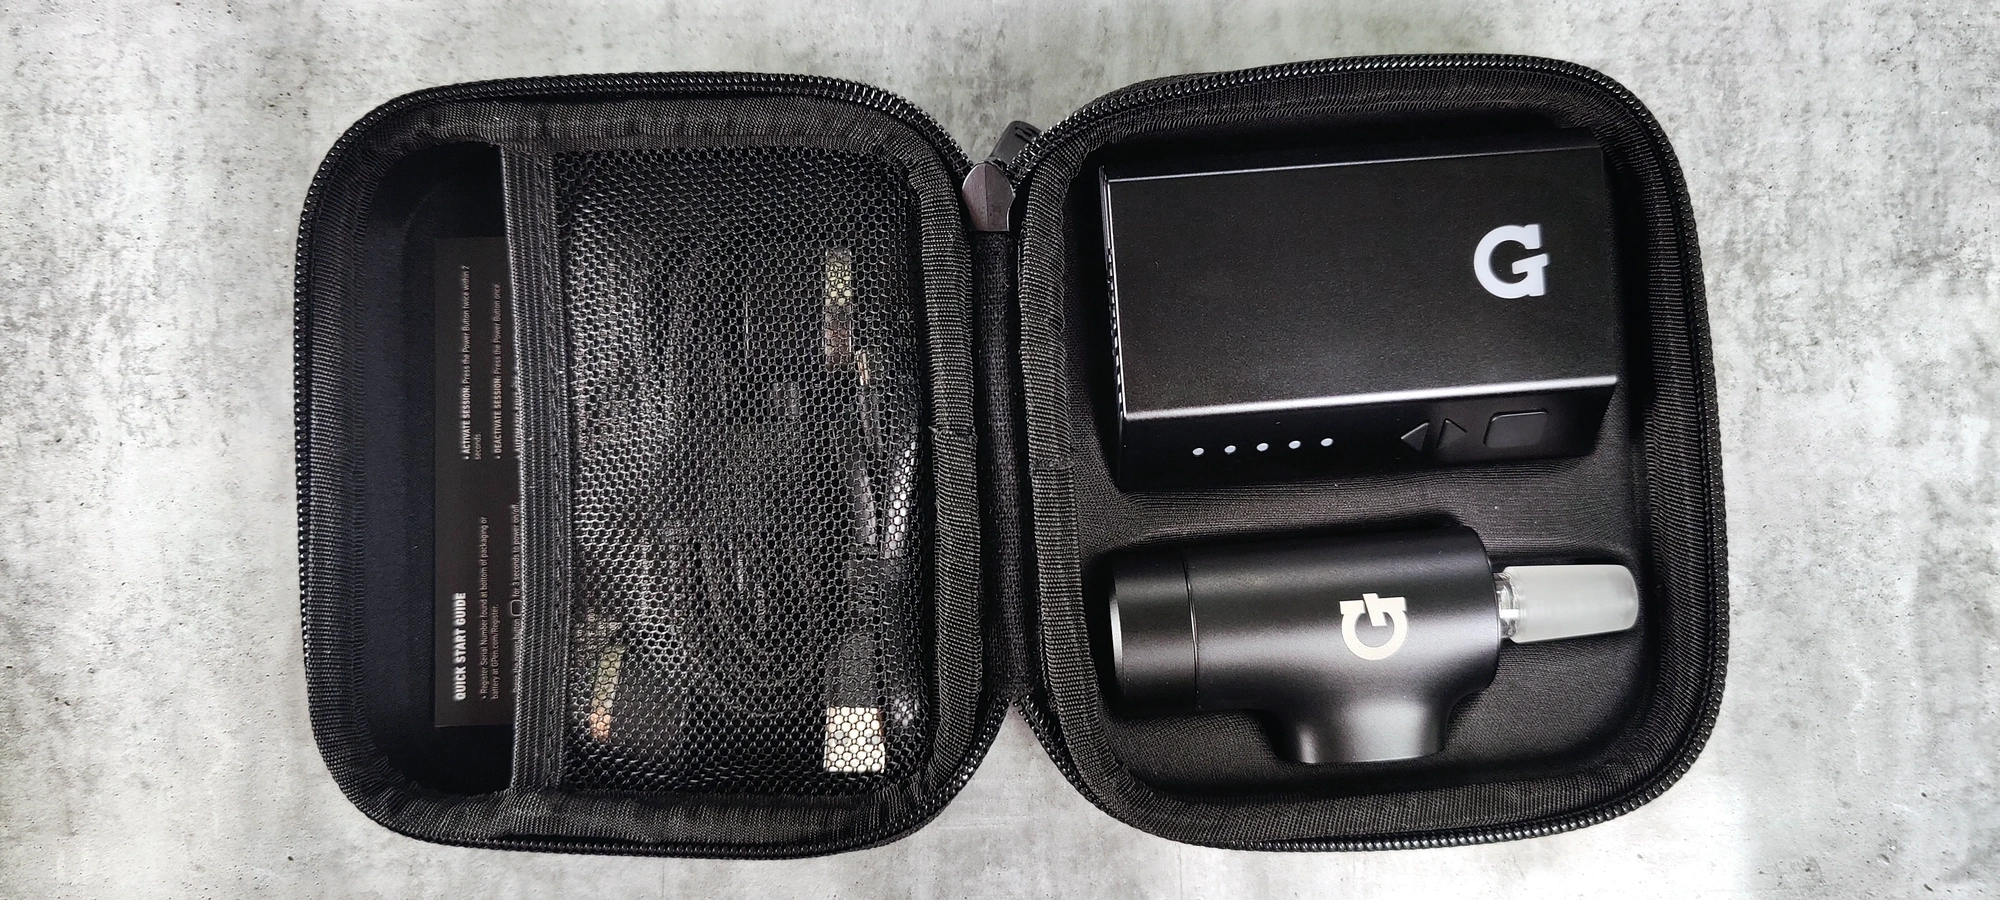 G Pen Hyer Packed into Travel Case